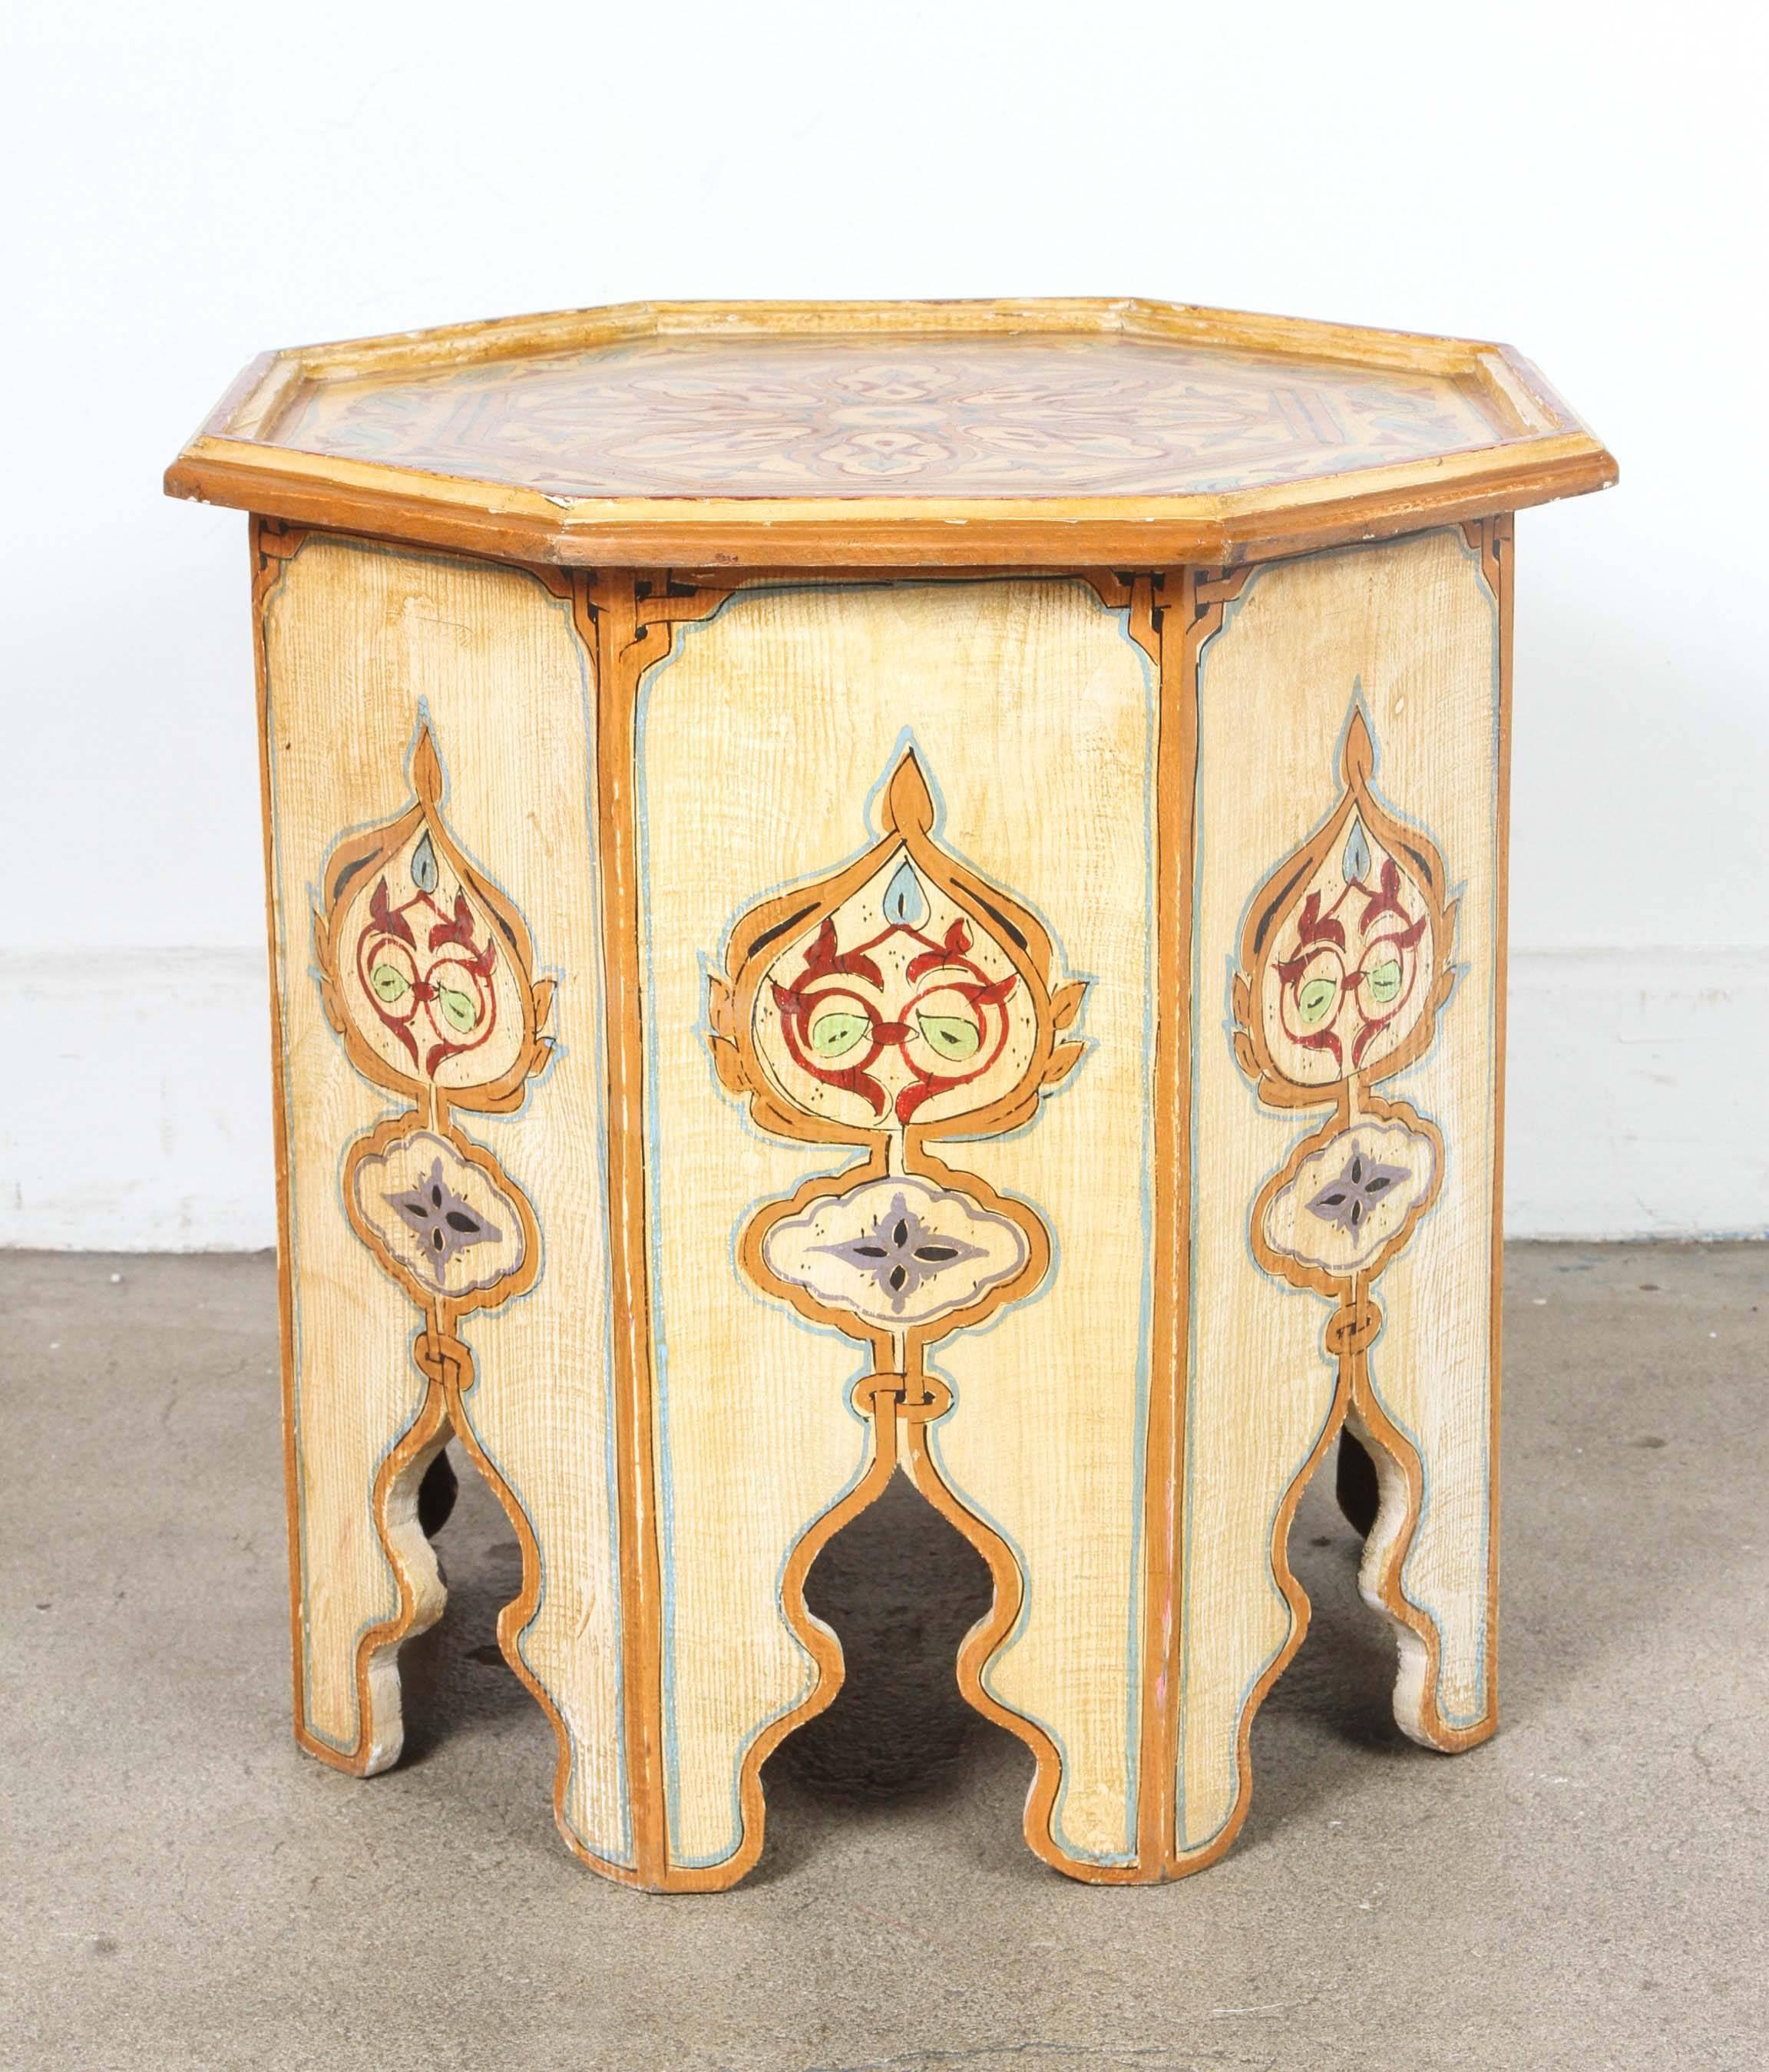 Moroccan ivory hand-painted side table with Moorish design.
Ivory background with multicolored floral and geometric designs.
Very fine artwork on an octagonal shape base.
This exotic side tables from Morocco will add a chic Boho accent in any